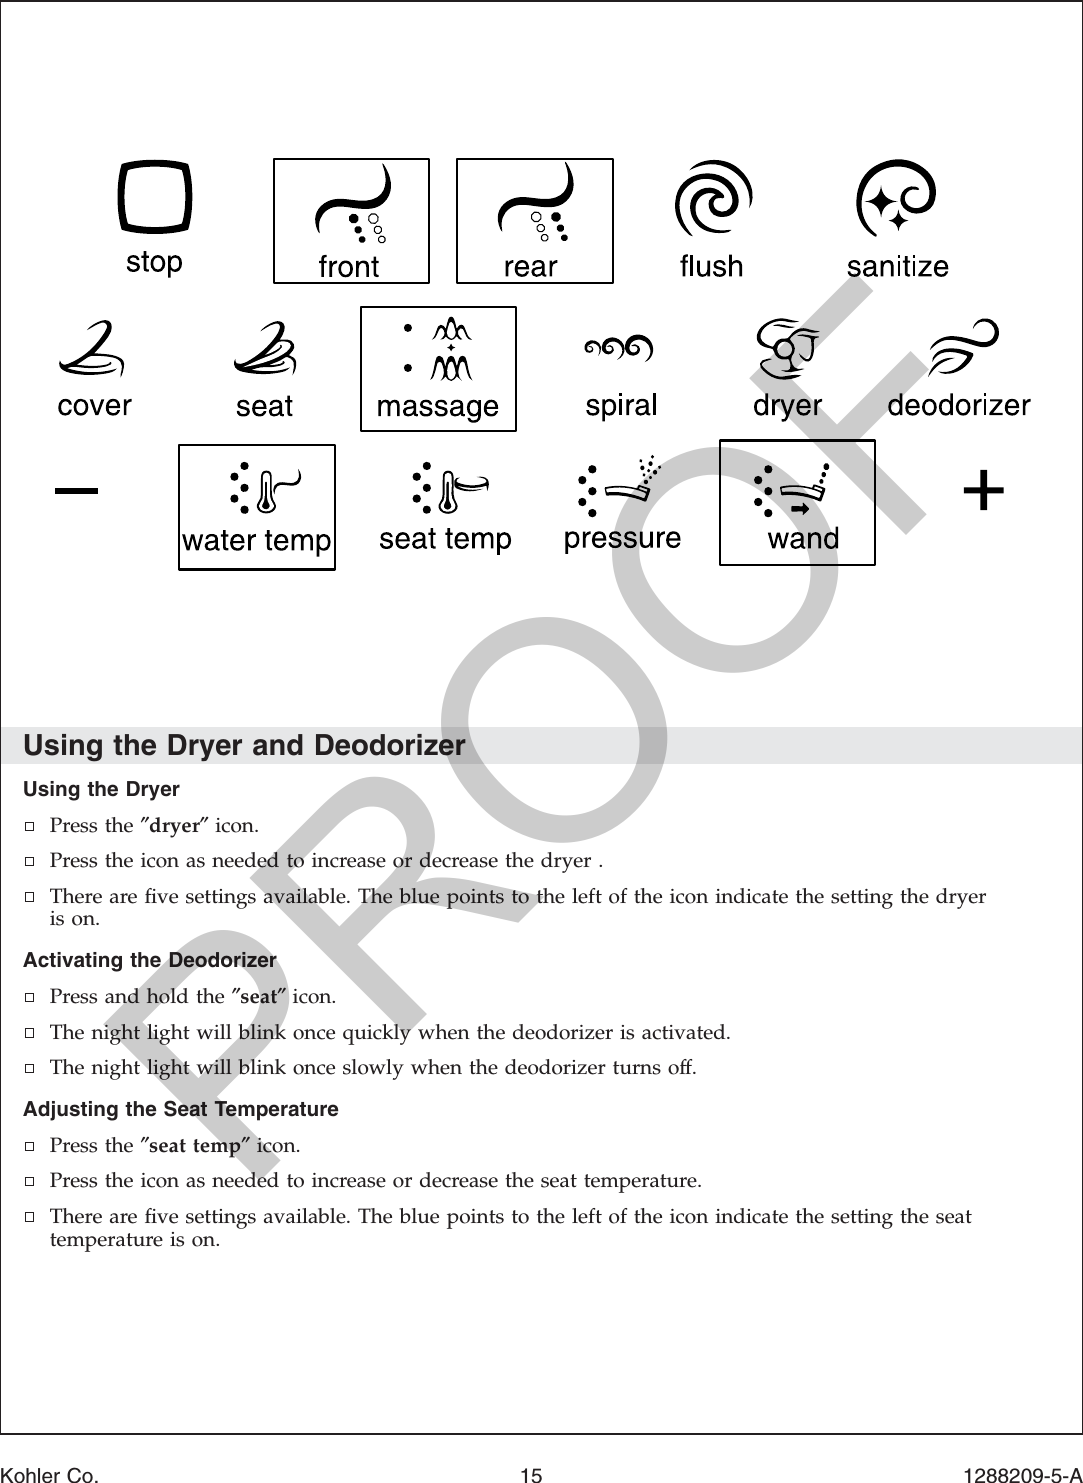 Using the Dryer and DeodorizerUsing the DryerPress the ″dryer″icon.Press the icon as needed to increase or decrease the dryer .There are ﬁve settings available. The blue points to the left of the icon indicate the setting the dryeris on.Activating the DeodorizerPress and hold the ″seat″icon.The night light will blink once quickly when the deodorizer is activated.The night light will blink once slowly when the deodorizer turns off.Adjusting the Seat TemperaturePress the ″seat temp″icon.Press the icon as needed to increase or decrease the seat temperature.There are ﬁve settings available. The blue points to the left of the icon indicate the setting the seattemperature is on.Kohler Co. 15 1288209-5-APROOF